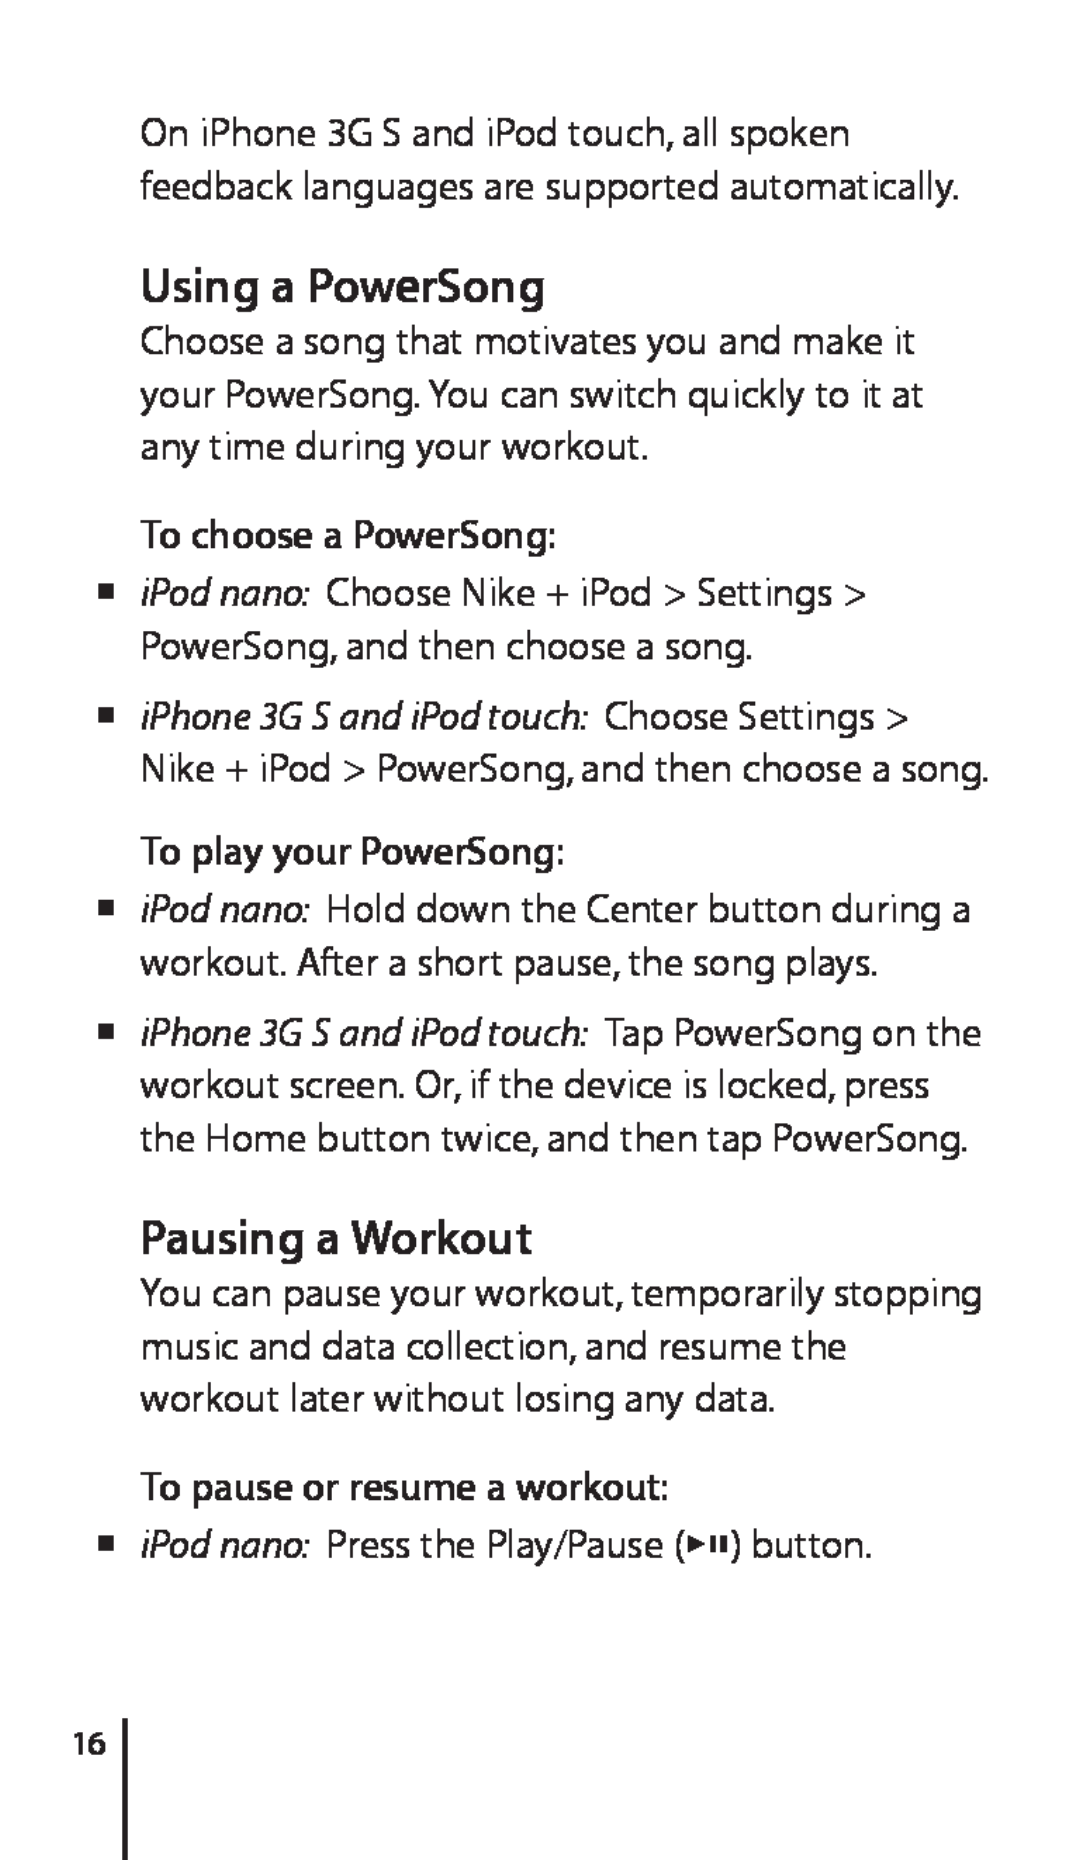 Apple Nike + iPod Sensor, 034-4945-A Using a PowerSong, Pausing a Workout, To choose a PowerSong, To play your PowerSong 